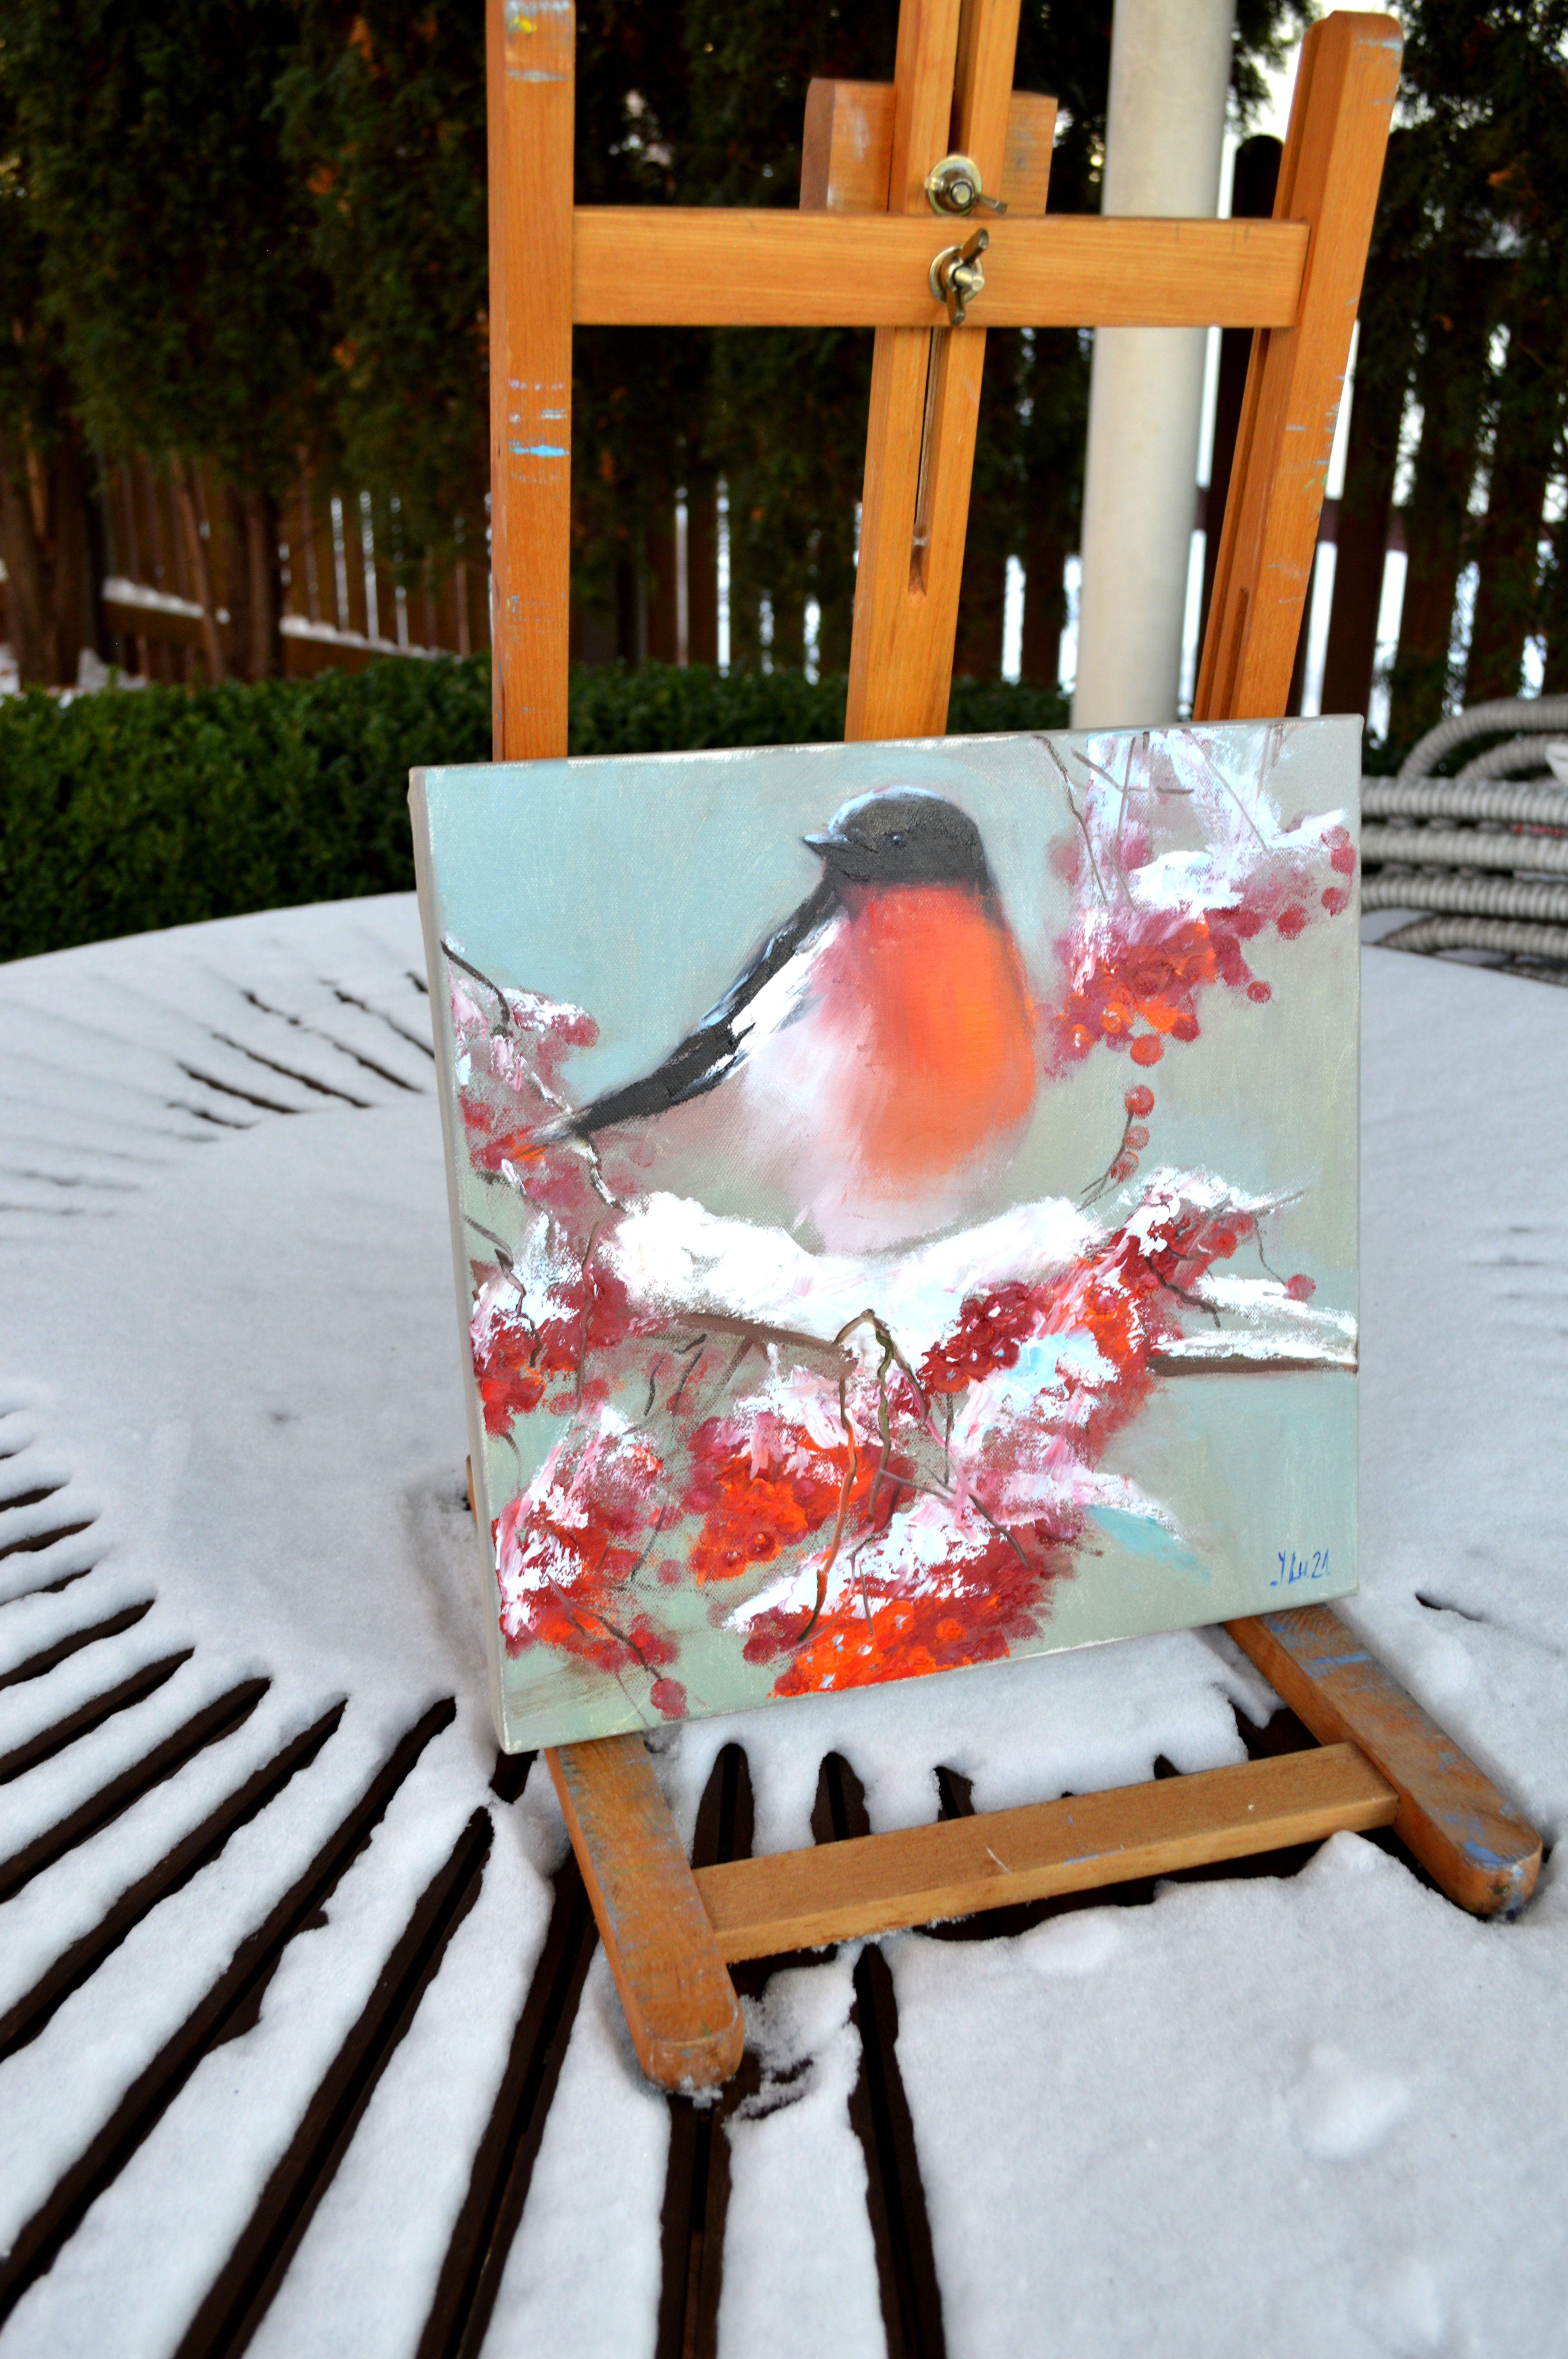 In this oil painting, I embraced the contrast of a vibrant bullfinch against a tranquil snowy backdrop. My strokes convey the bird's softness and strength, its vivid chest a beacon of warmth in winter's embrace. It's an expressionist celebration of